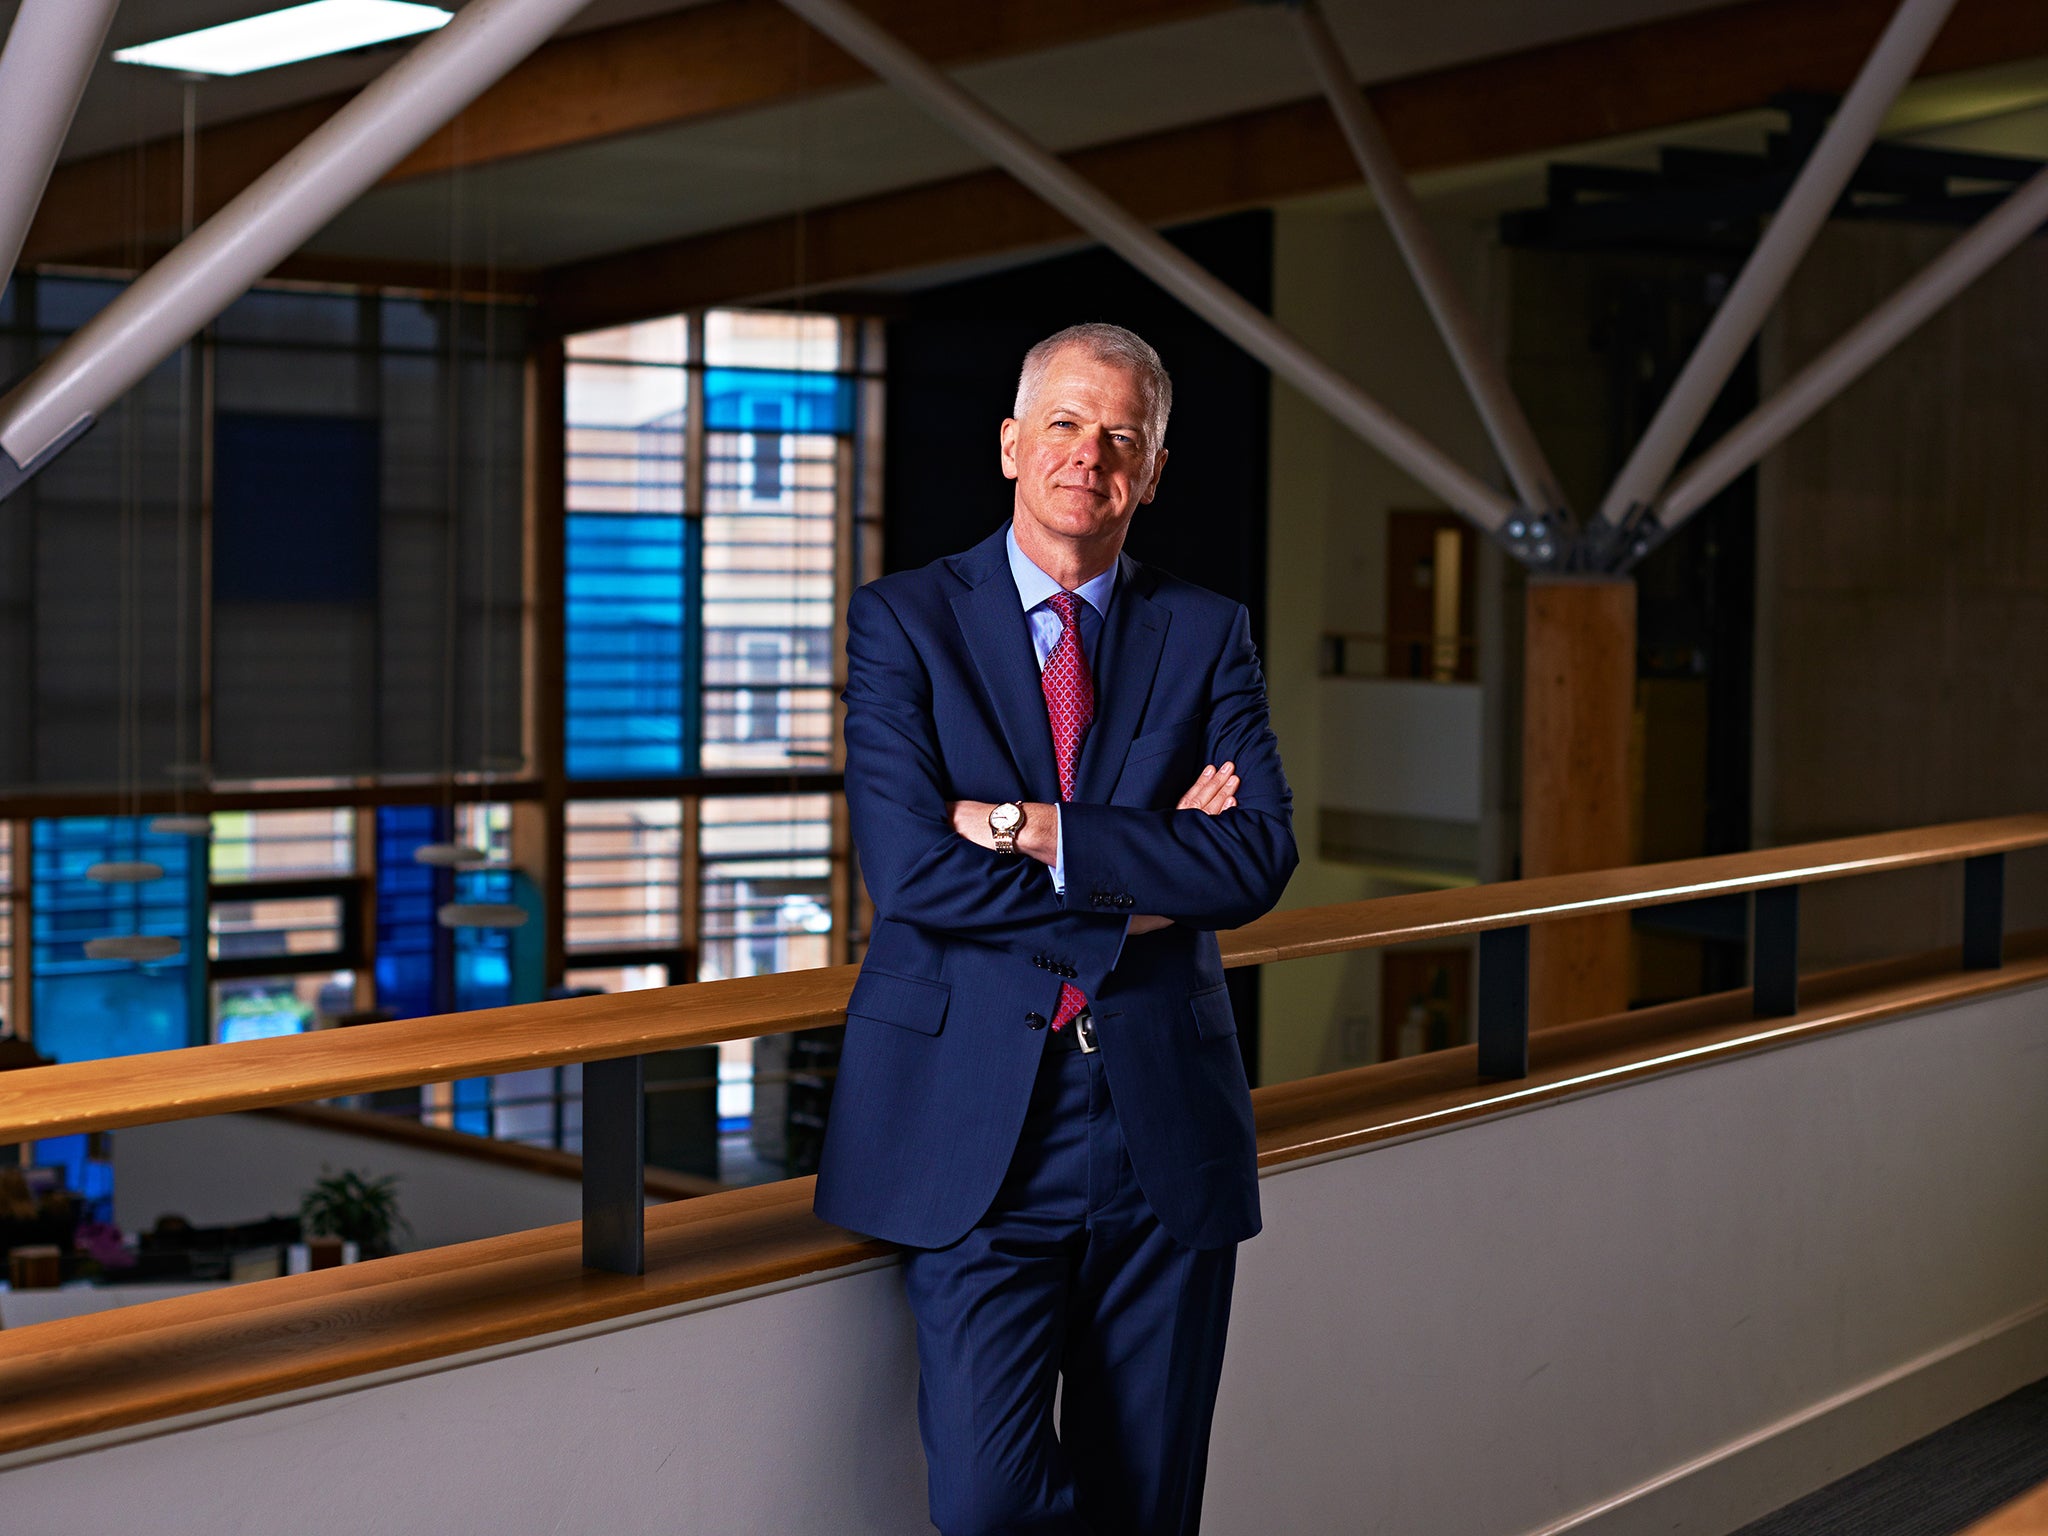 Sir David Bell, who is now vice-chancellor of Reading University